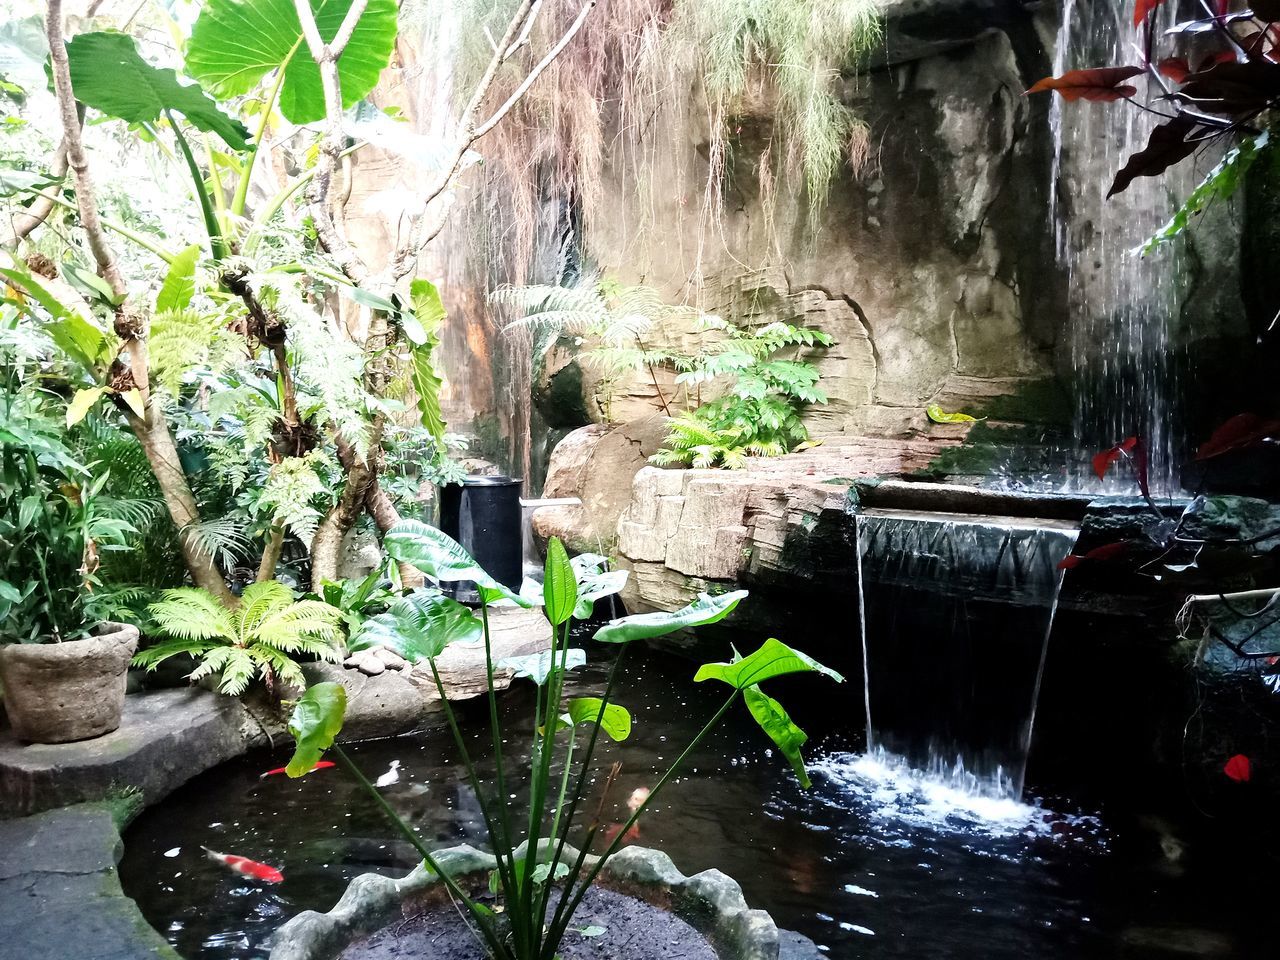 waterfall, water feature, water, plant, nature, pond, growth, day, no people, jungle, backyard, outdoors, garden, architecture, potted plant, built structure, flowing water, leaf, beauty in nature, plant part, fountain, flower, green, splashing, tree, motion, rock